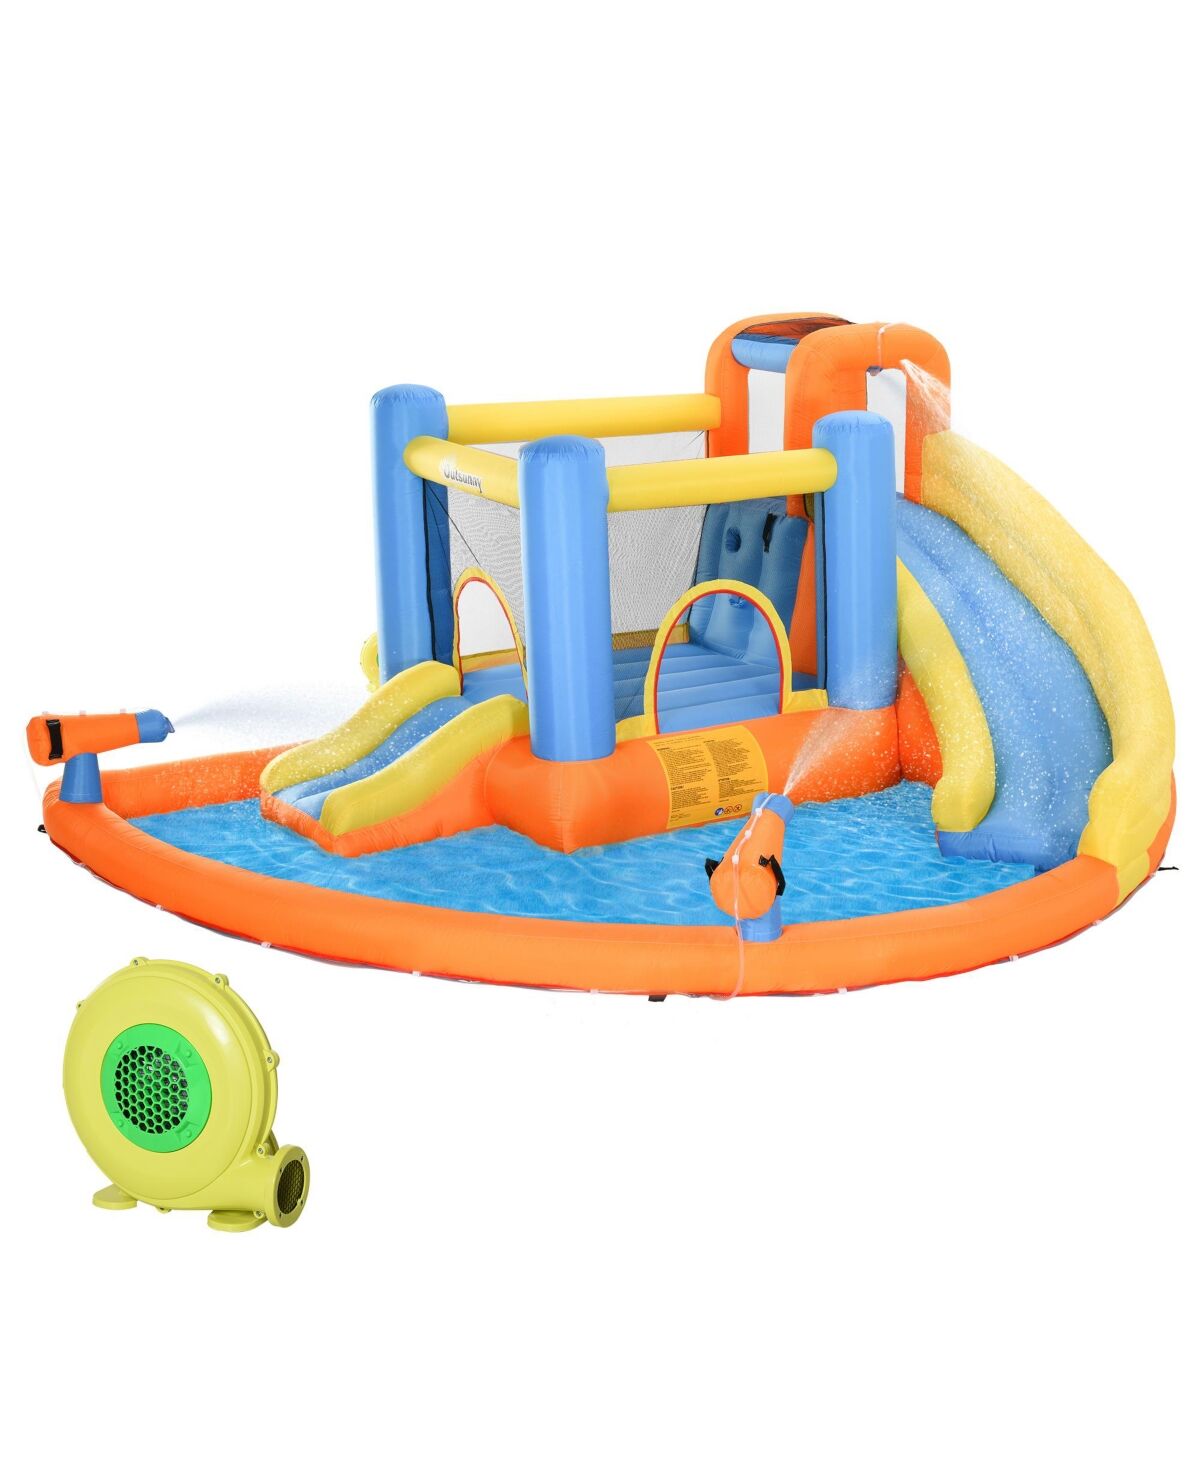 Outsunny 13.7' x 11.8' x 6.2' Outdoor Inflated Castle Splashing, Slide & Climb - Open Miscellaneous